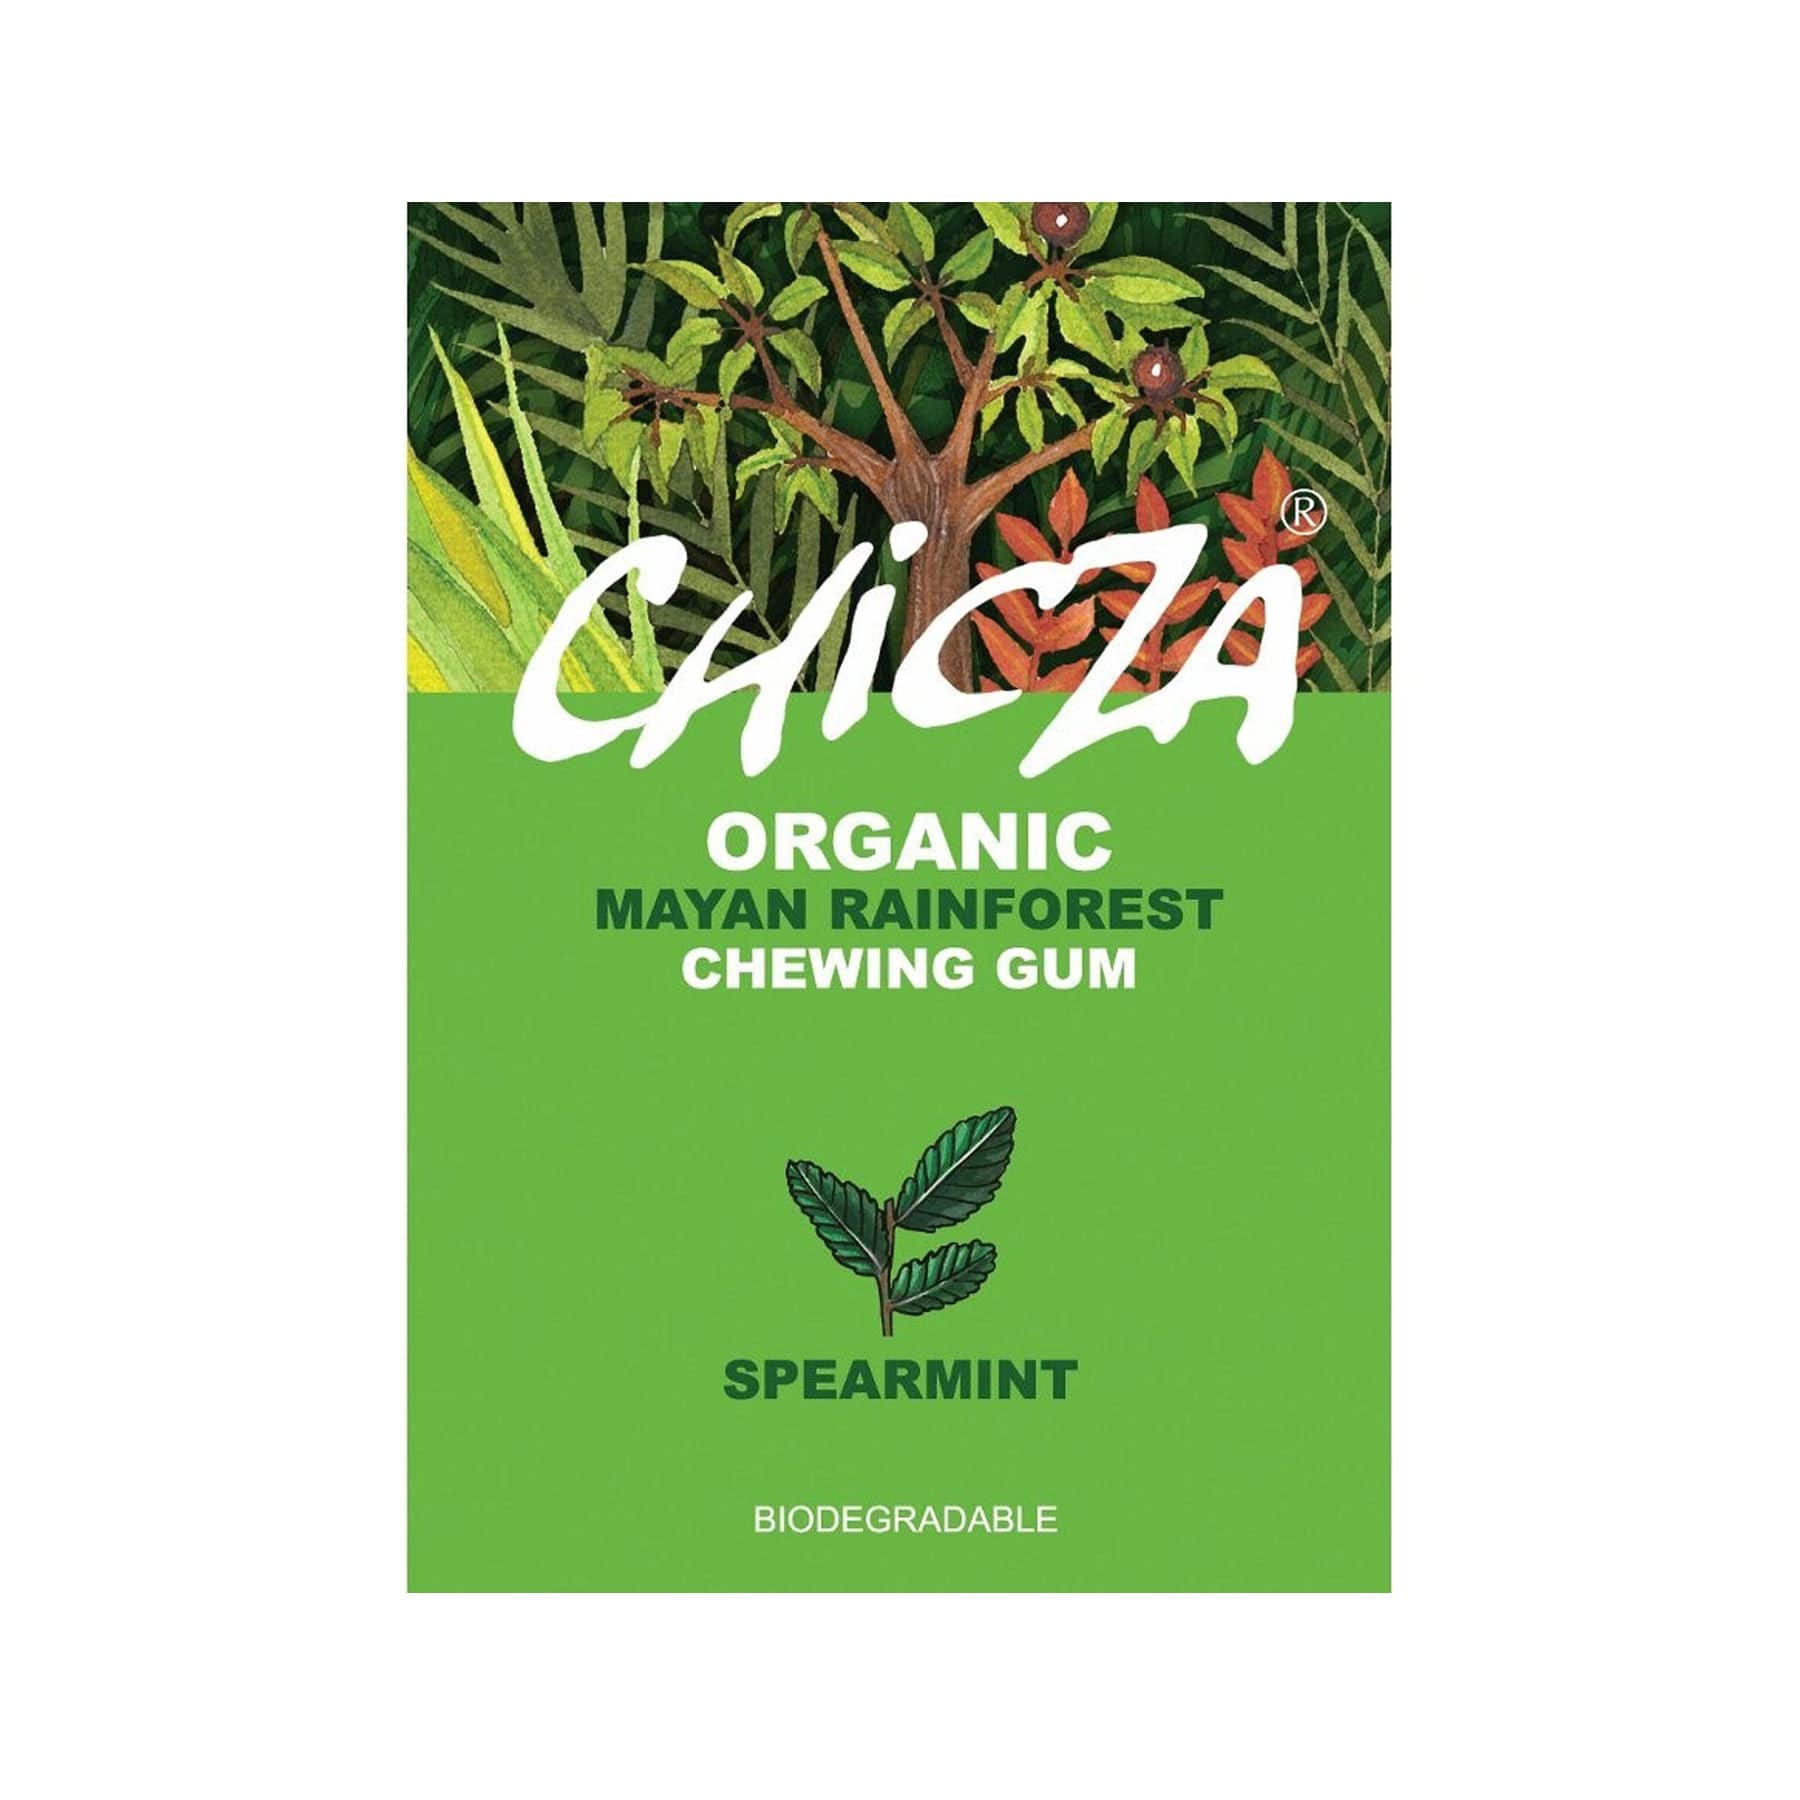 Chicza organic spearmint chewing gum packaging with Mayan rainforest theme and biodegradable claim.